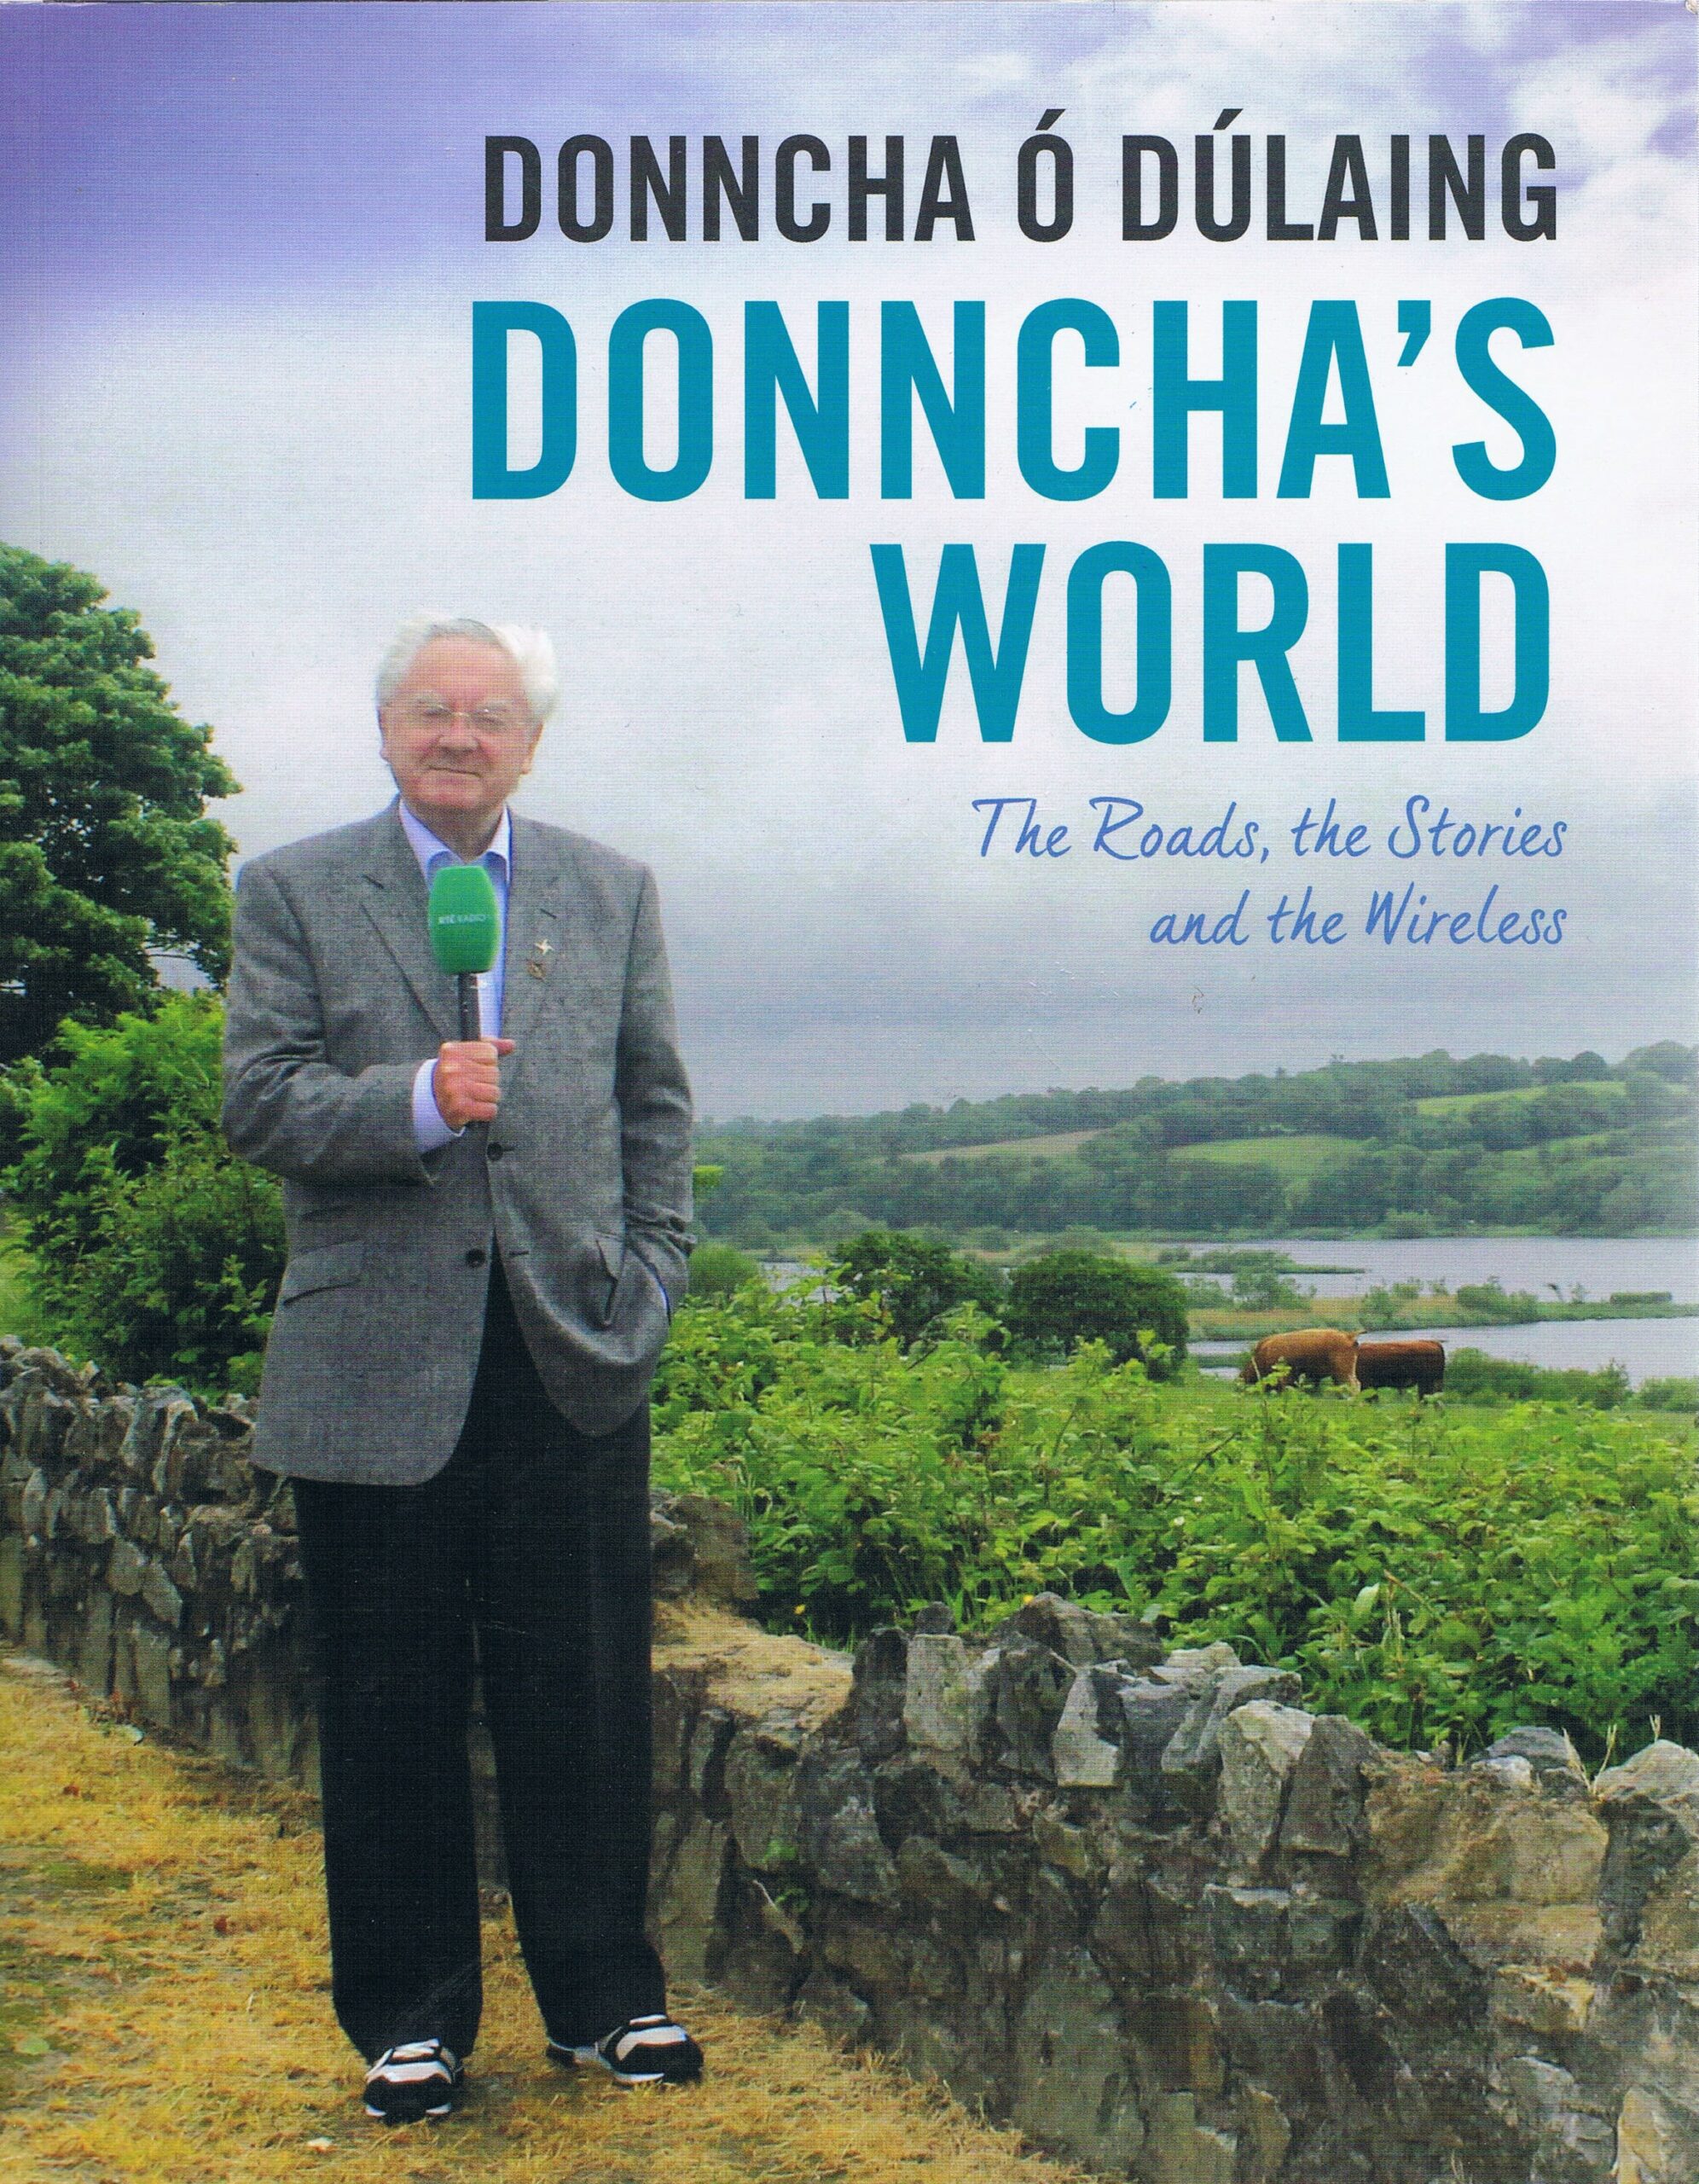 Donncha’s World: The Roads, the Stories and the Wireless by Donncha Ó Dúlaing